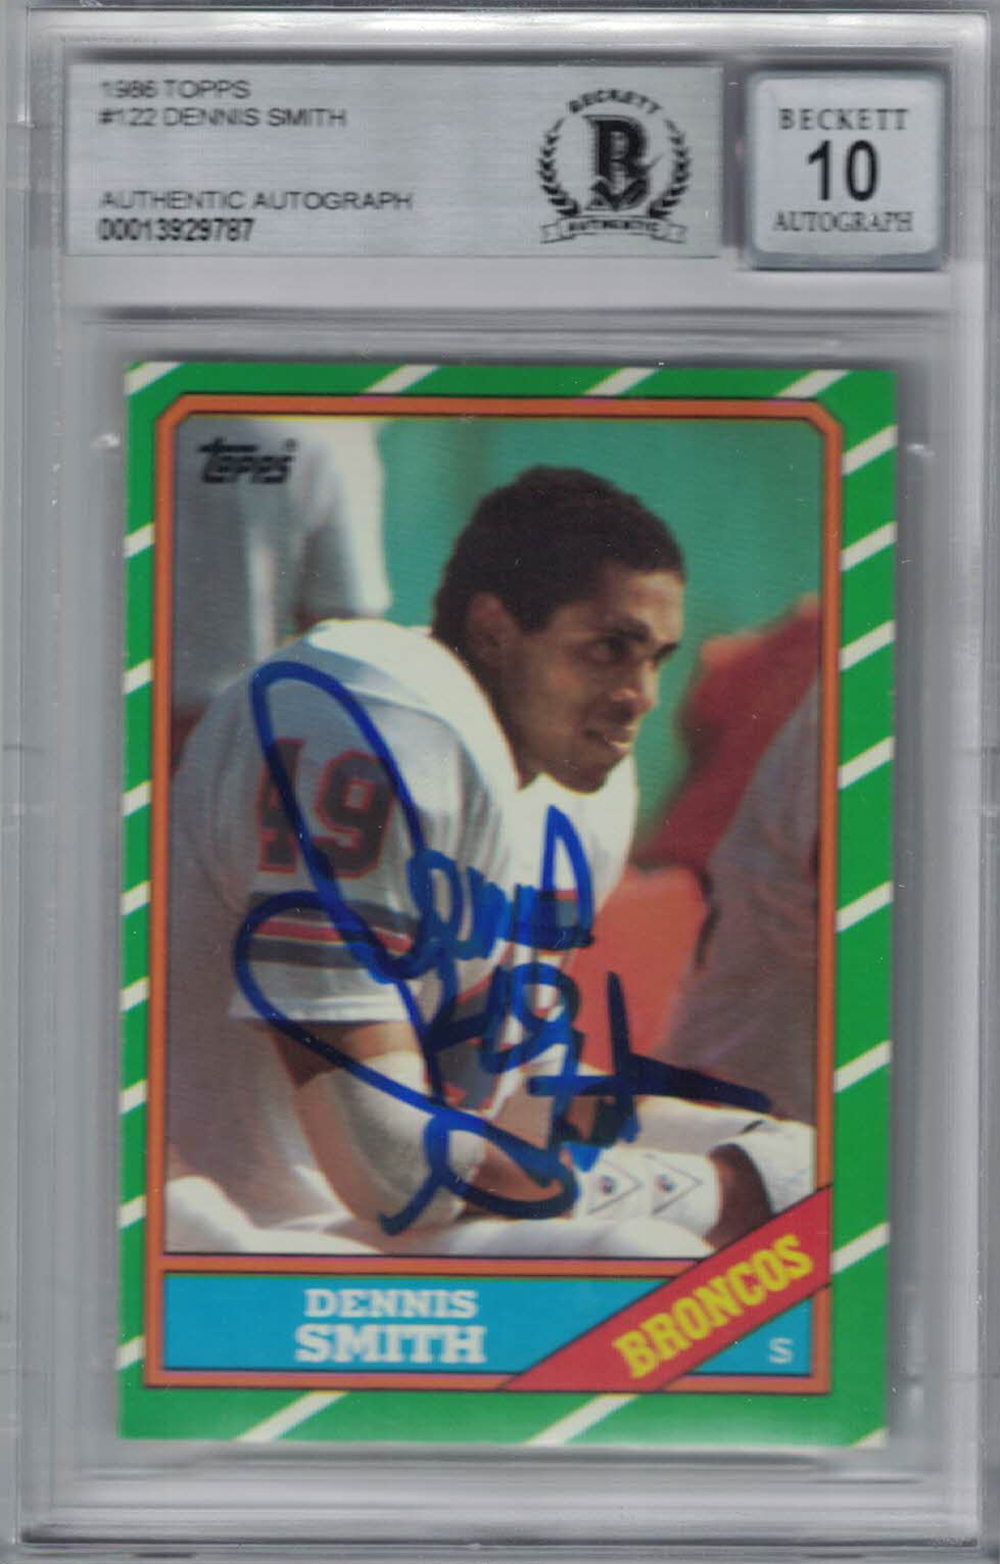 Dennis Smith Autographed 1986 Topps #122 Rookie Card Beckett Slabbed